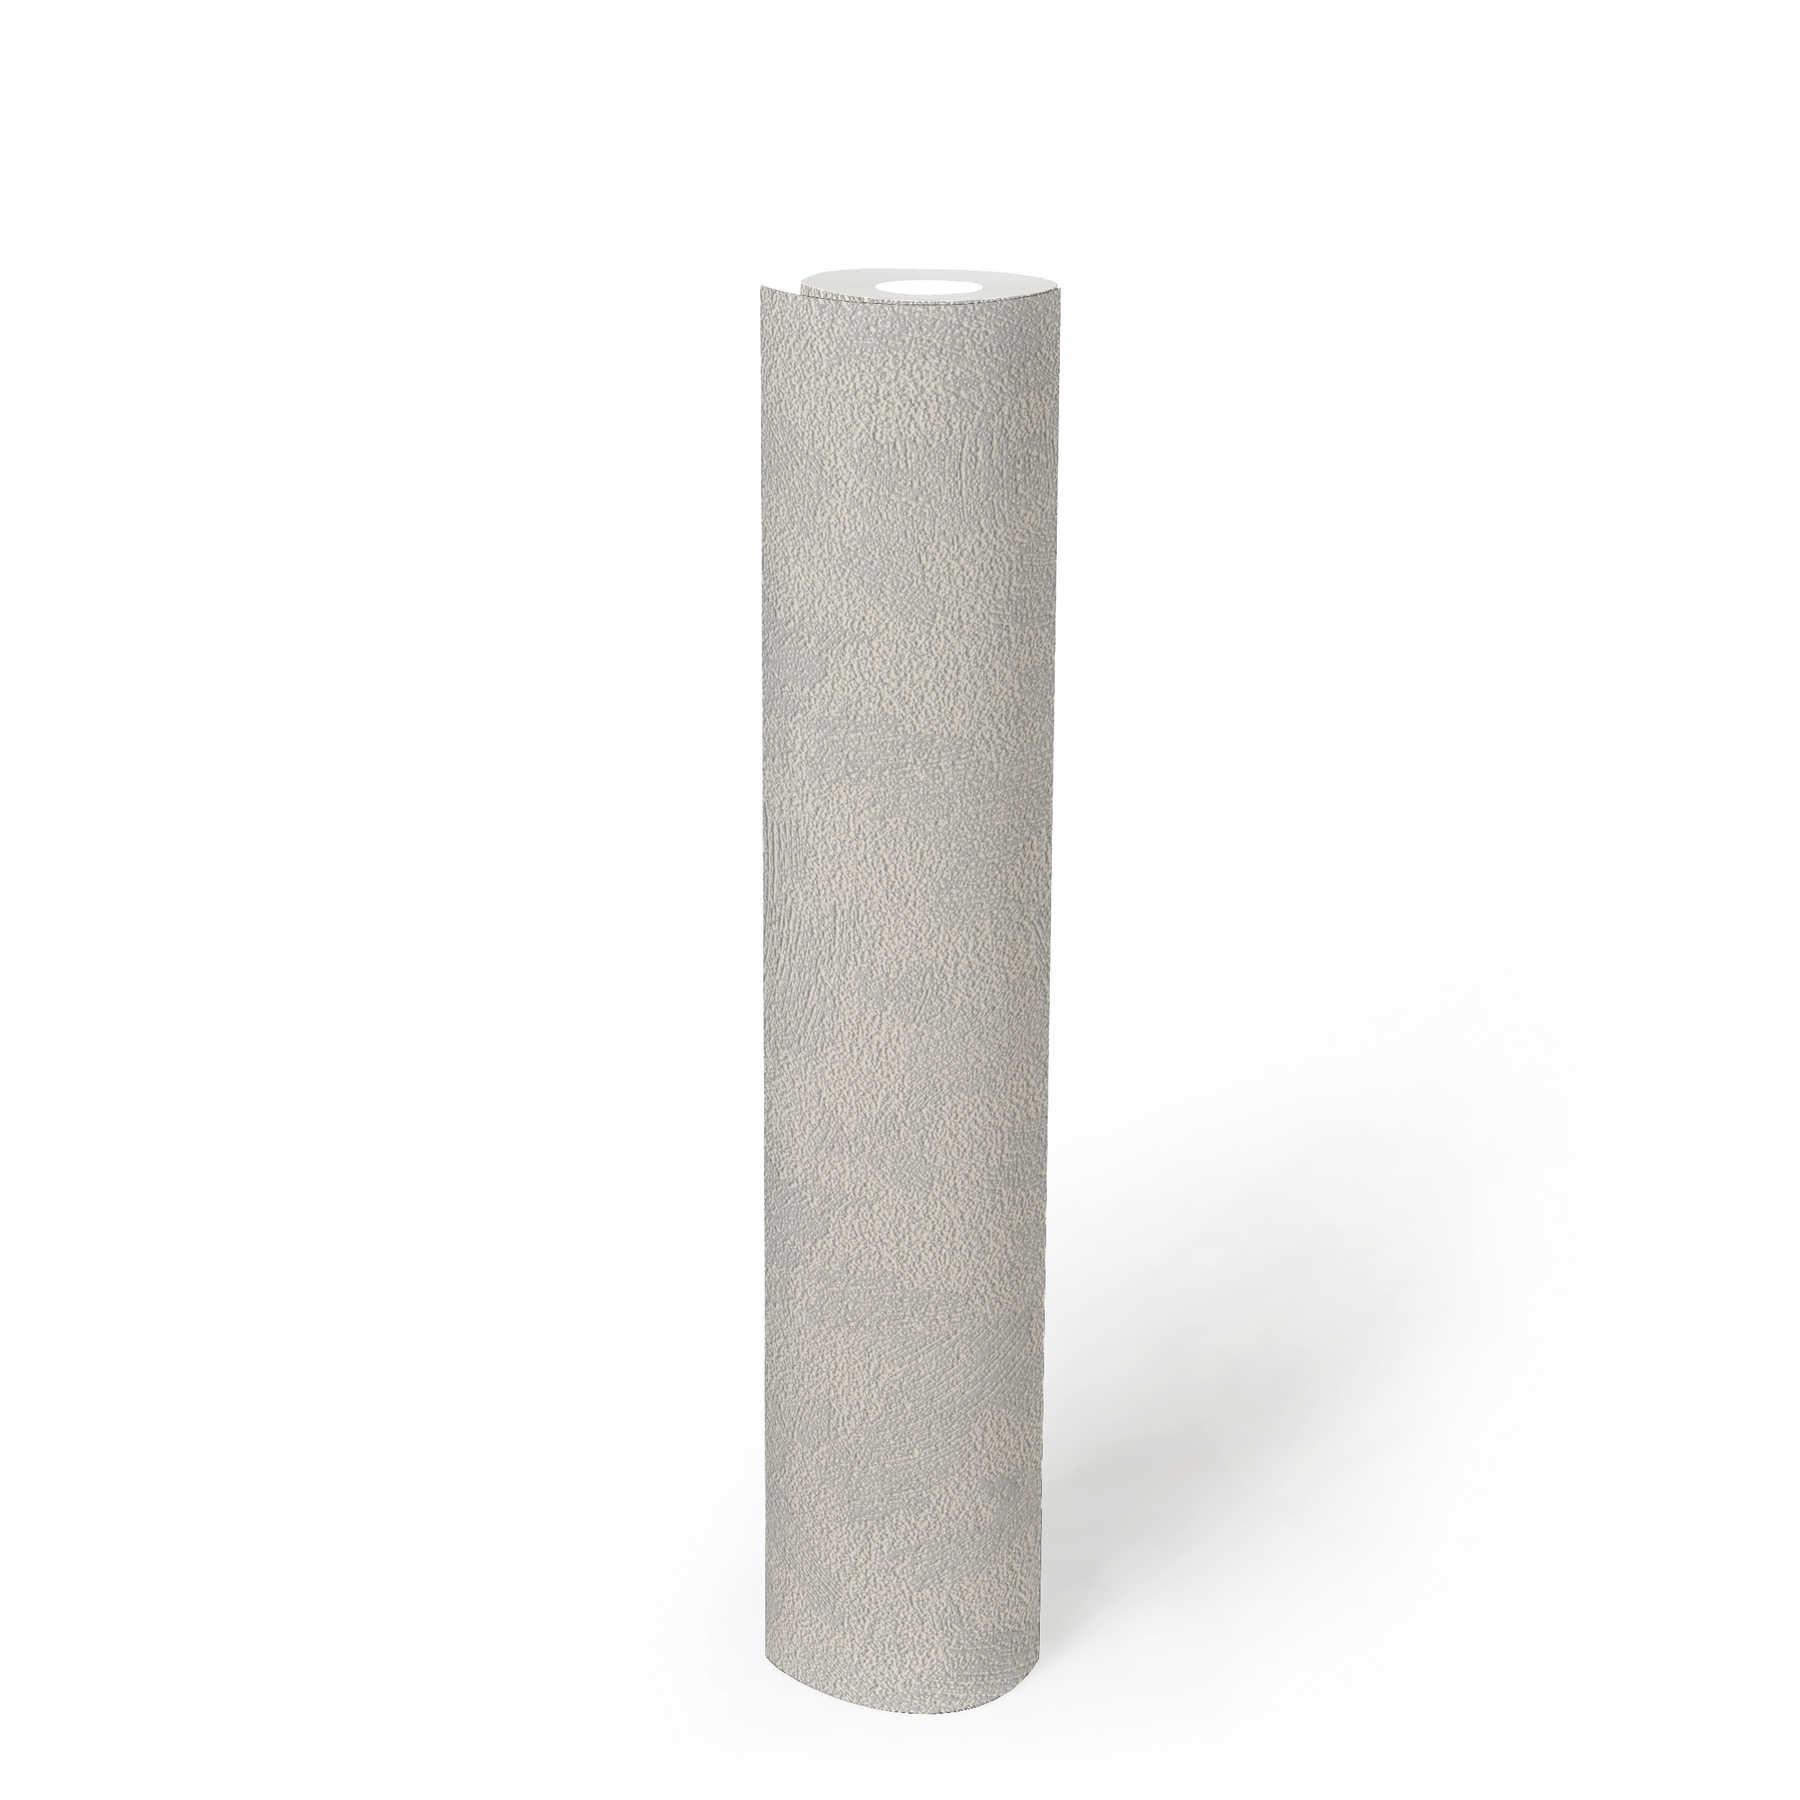             Textured wallpaper with three-dimensional plaster look - paintable, white
        